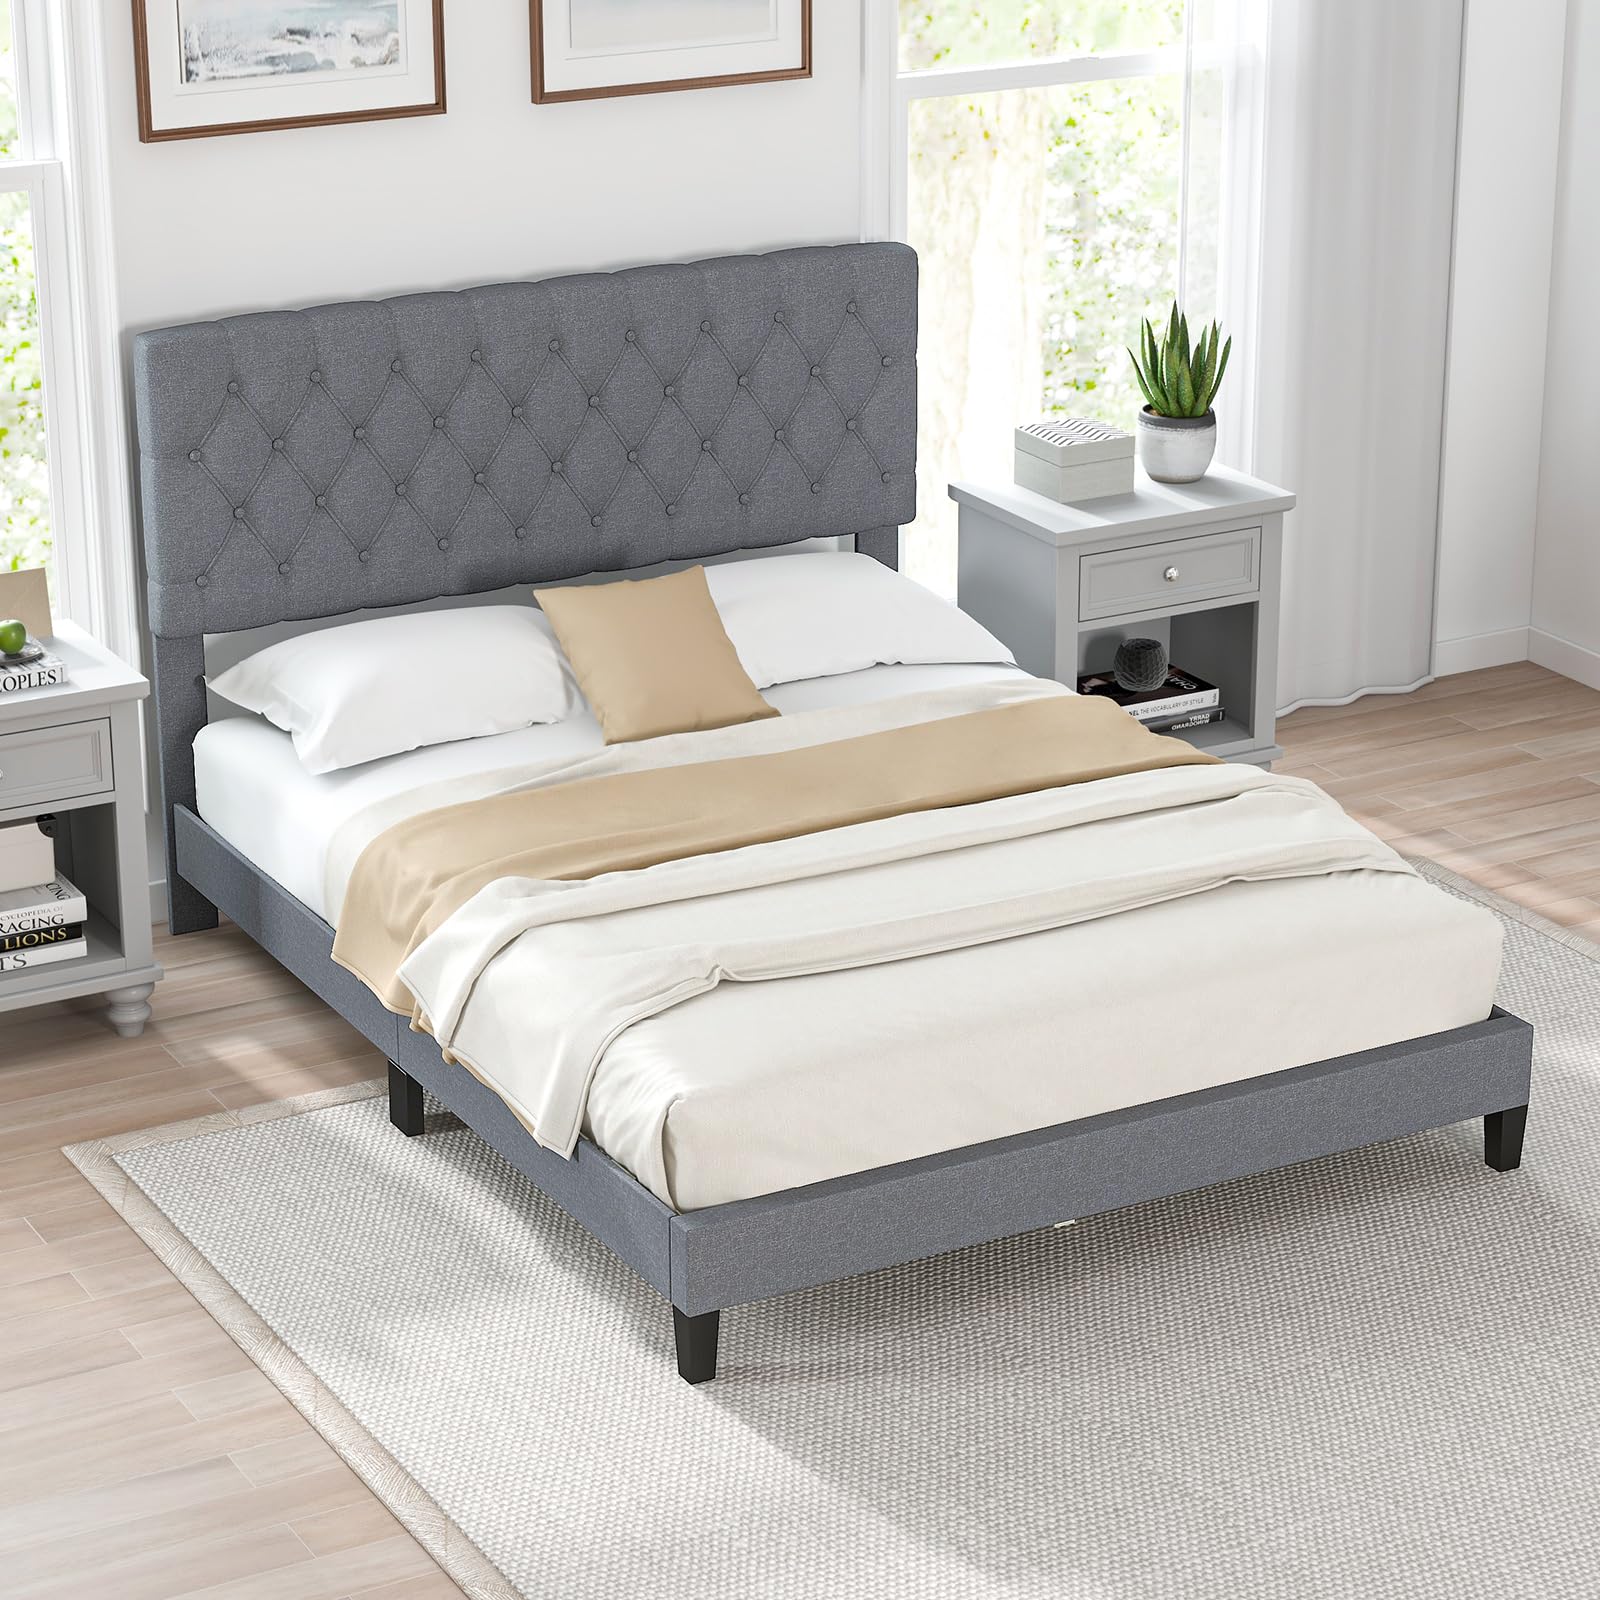 Giantex Queen Bed Frame, Upholstered Platform Bed with Button Tufted Headboard and Solid Wooden Slats Support